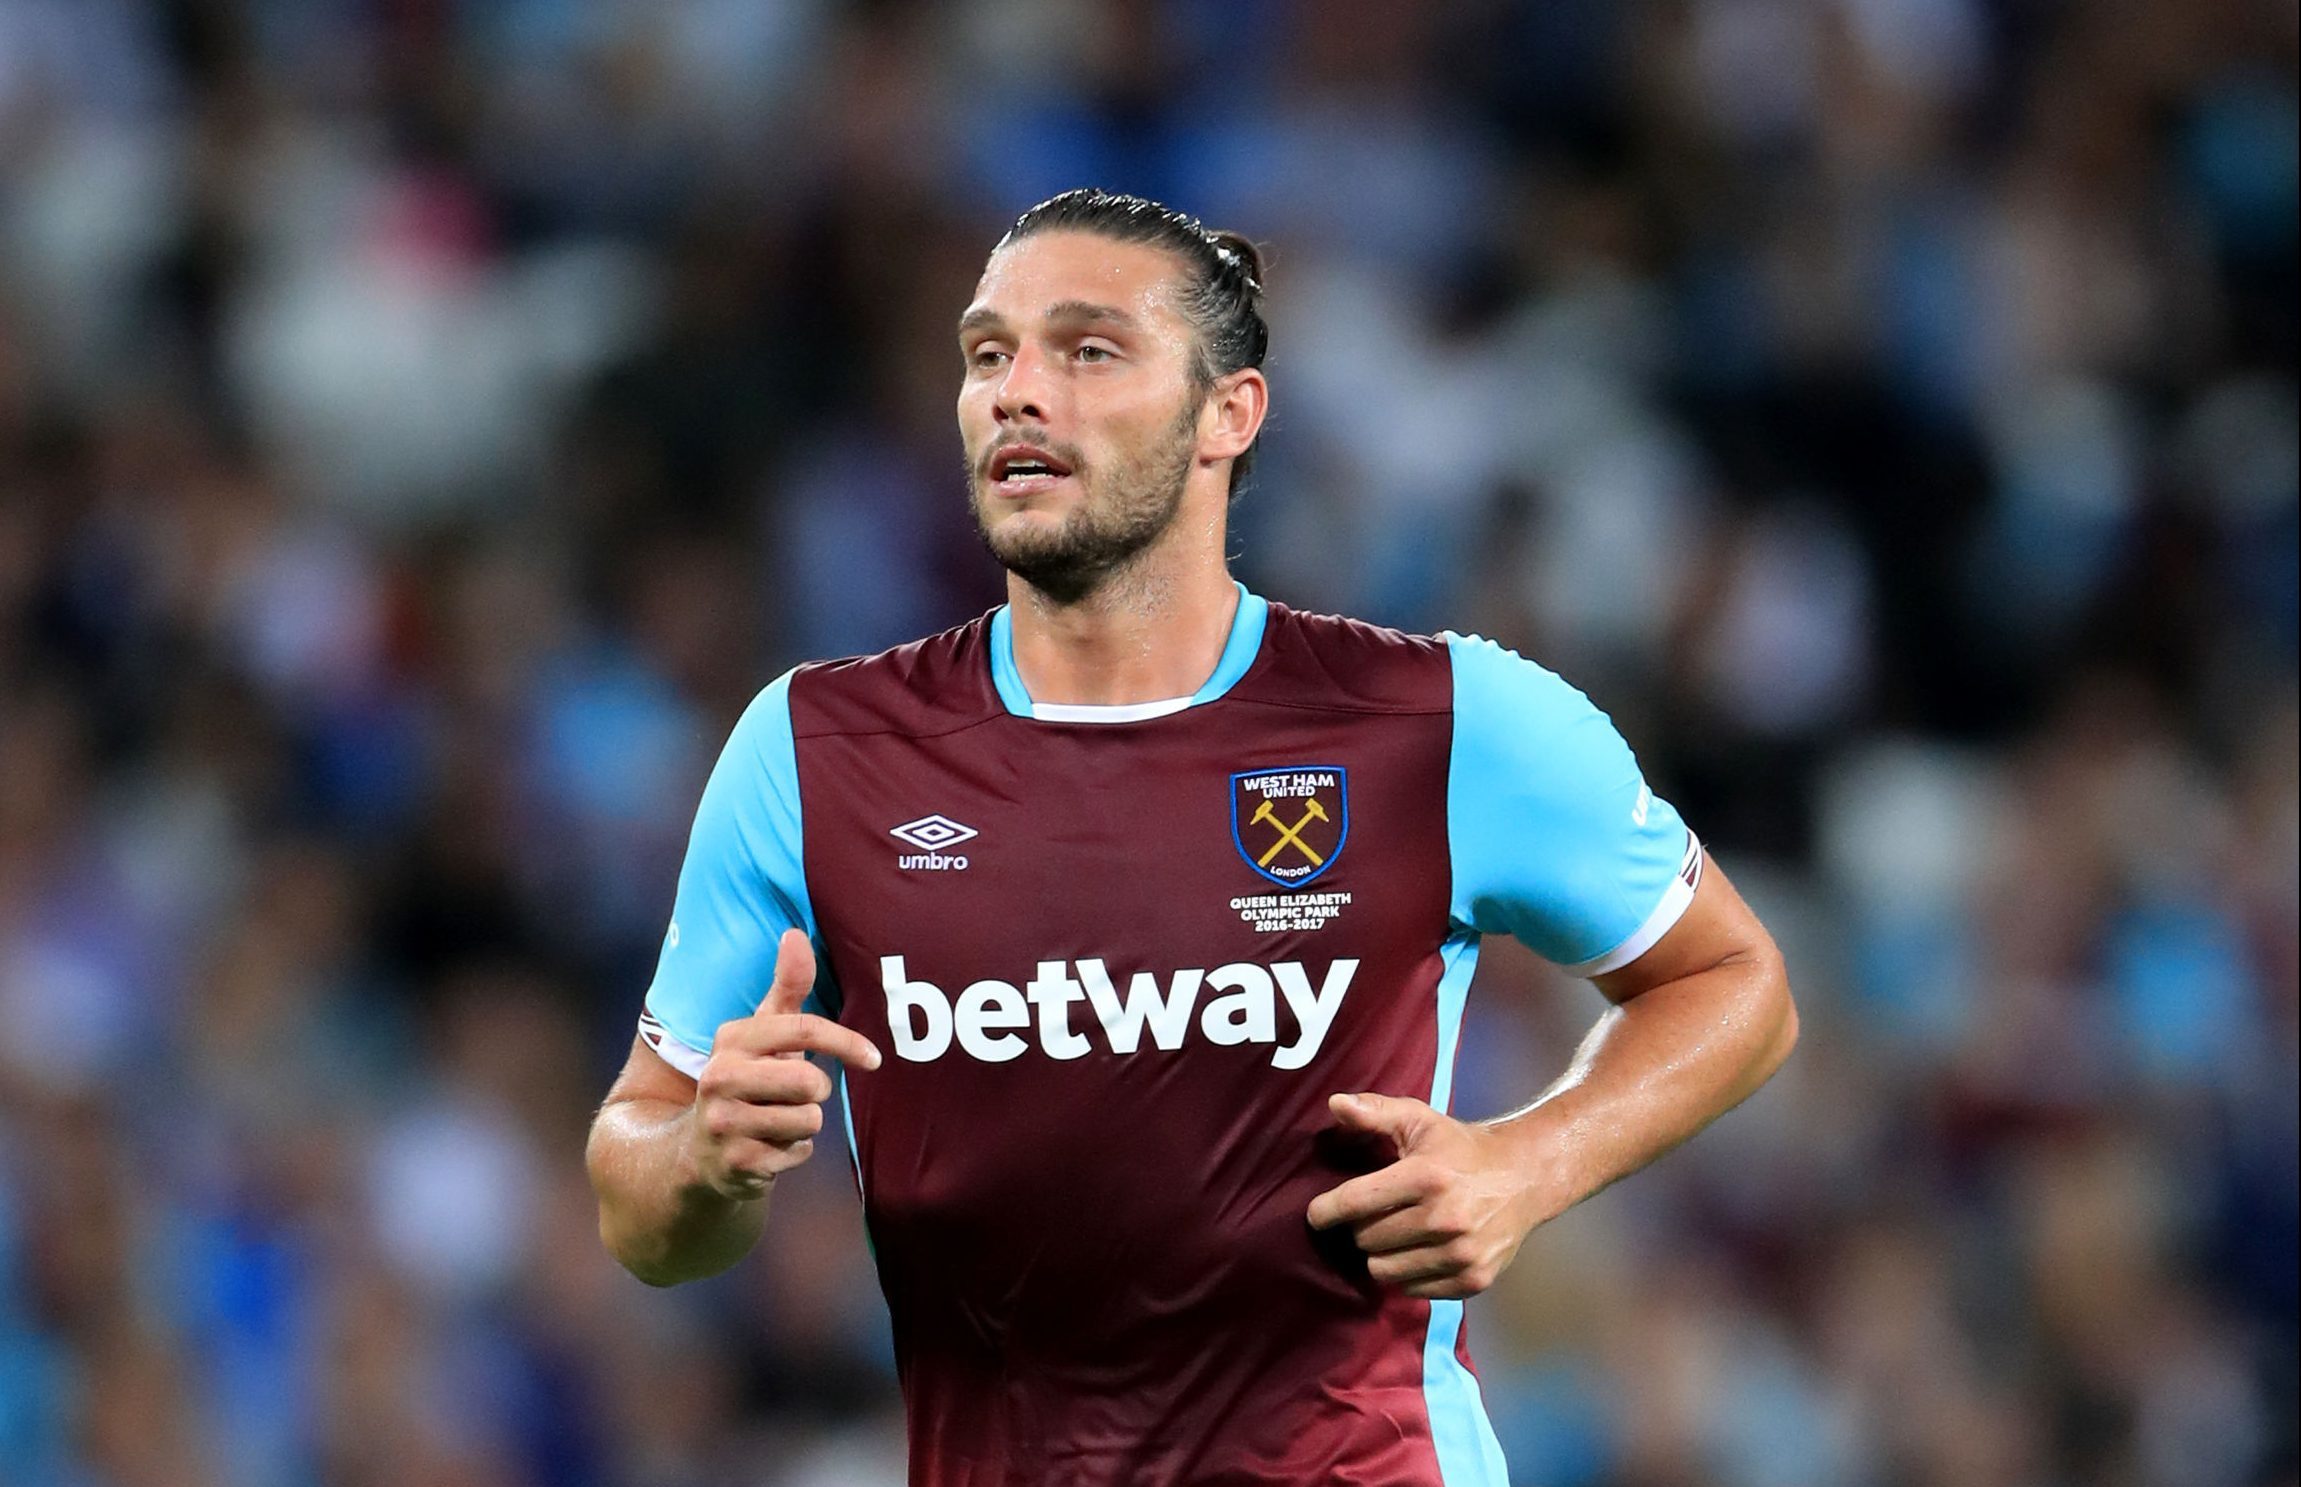 Andy Carroll of West Ham United is one of the players understood to have been ripped off by Ackerman